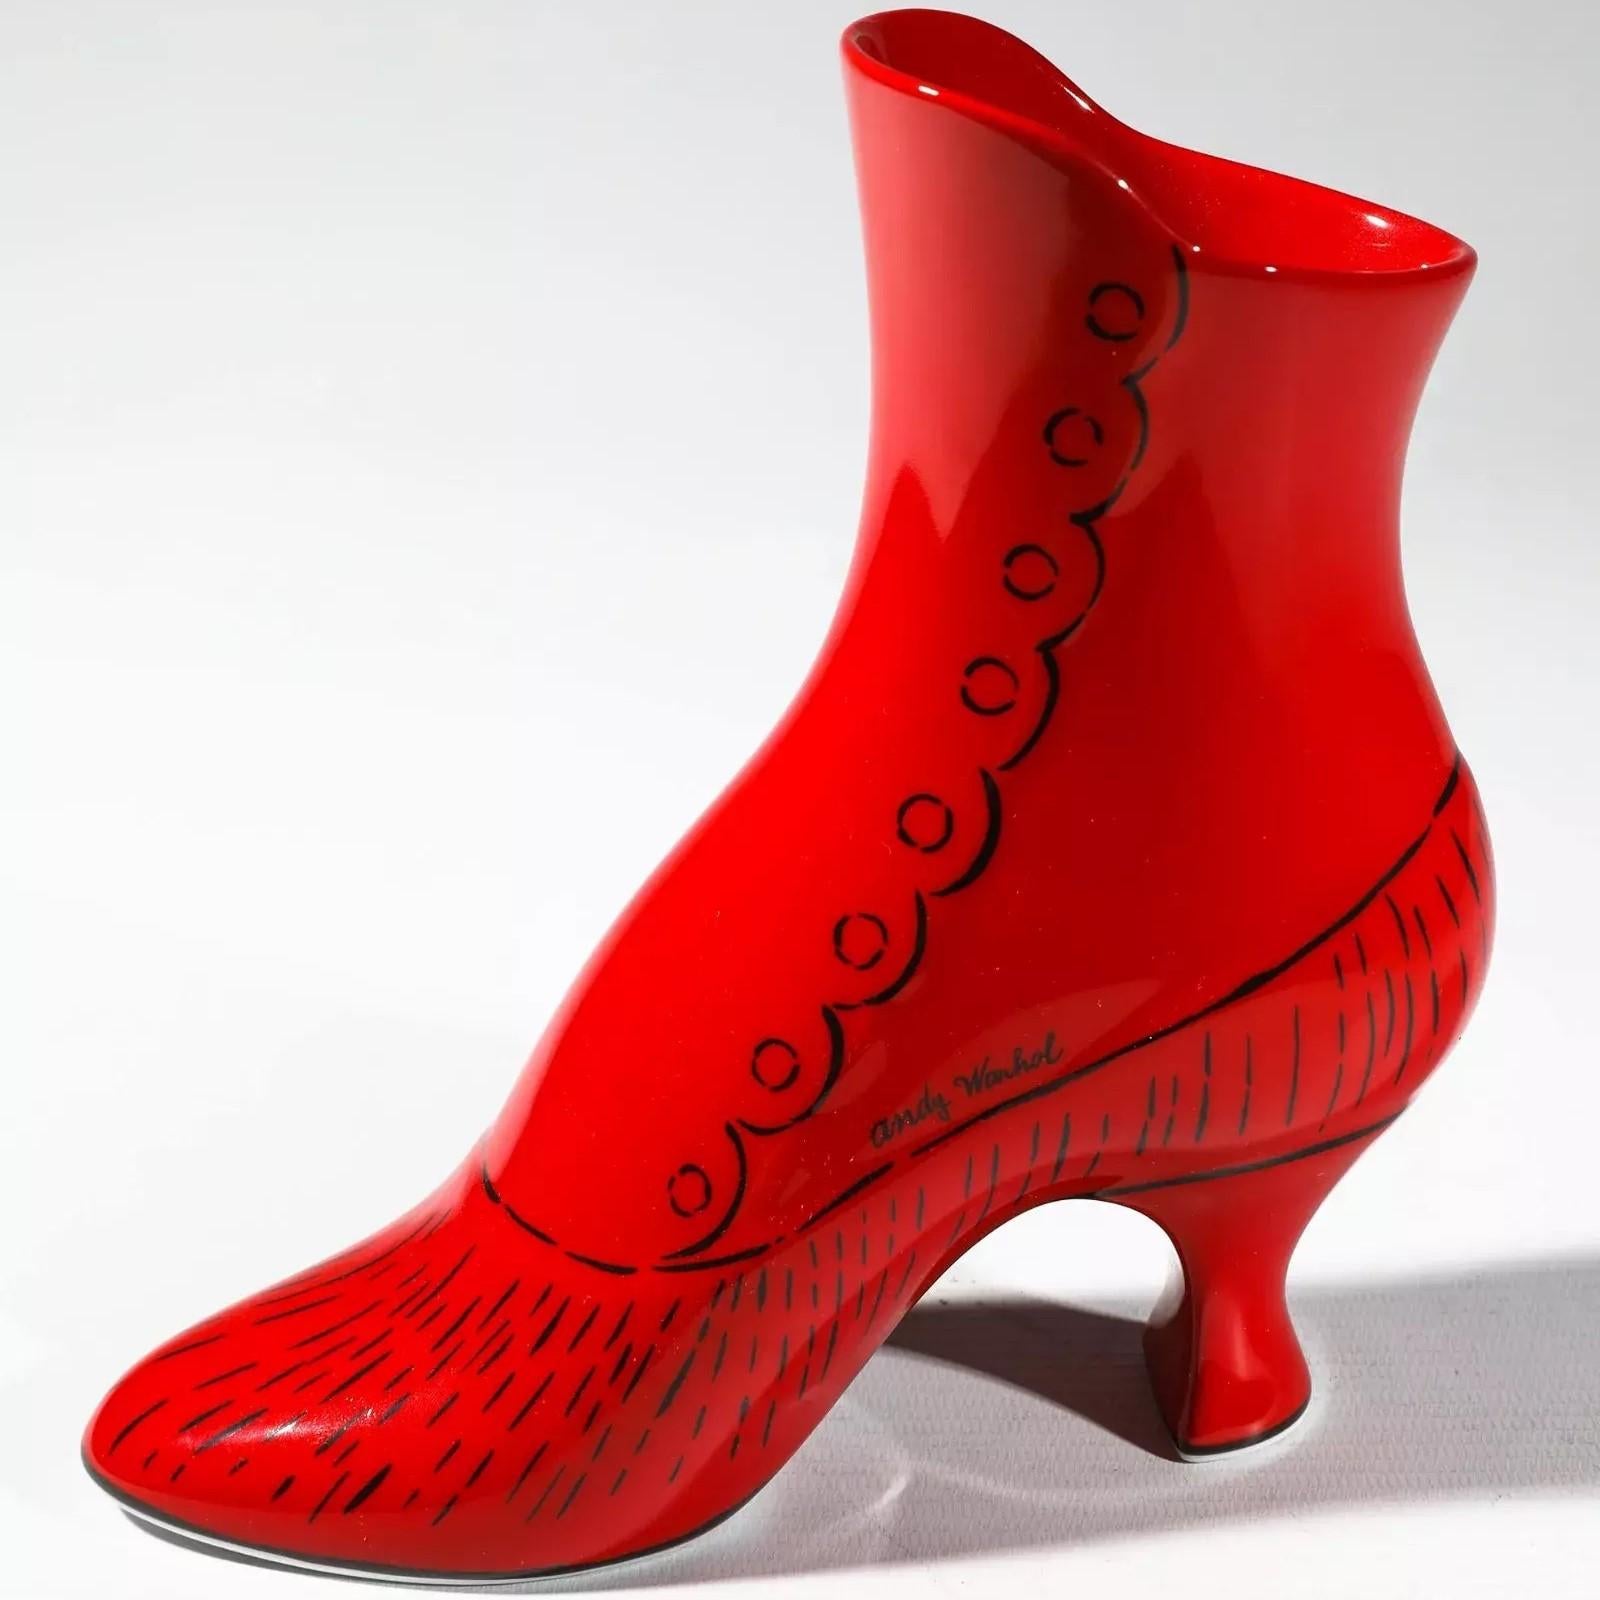 Andy Warhol, Red Christmas Shoe -Porcelain, Contemporary, Edition, Pop Art, Gift - Sculpture by (after) Andy Warhol